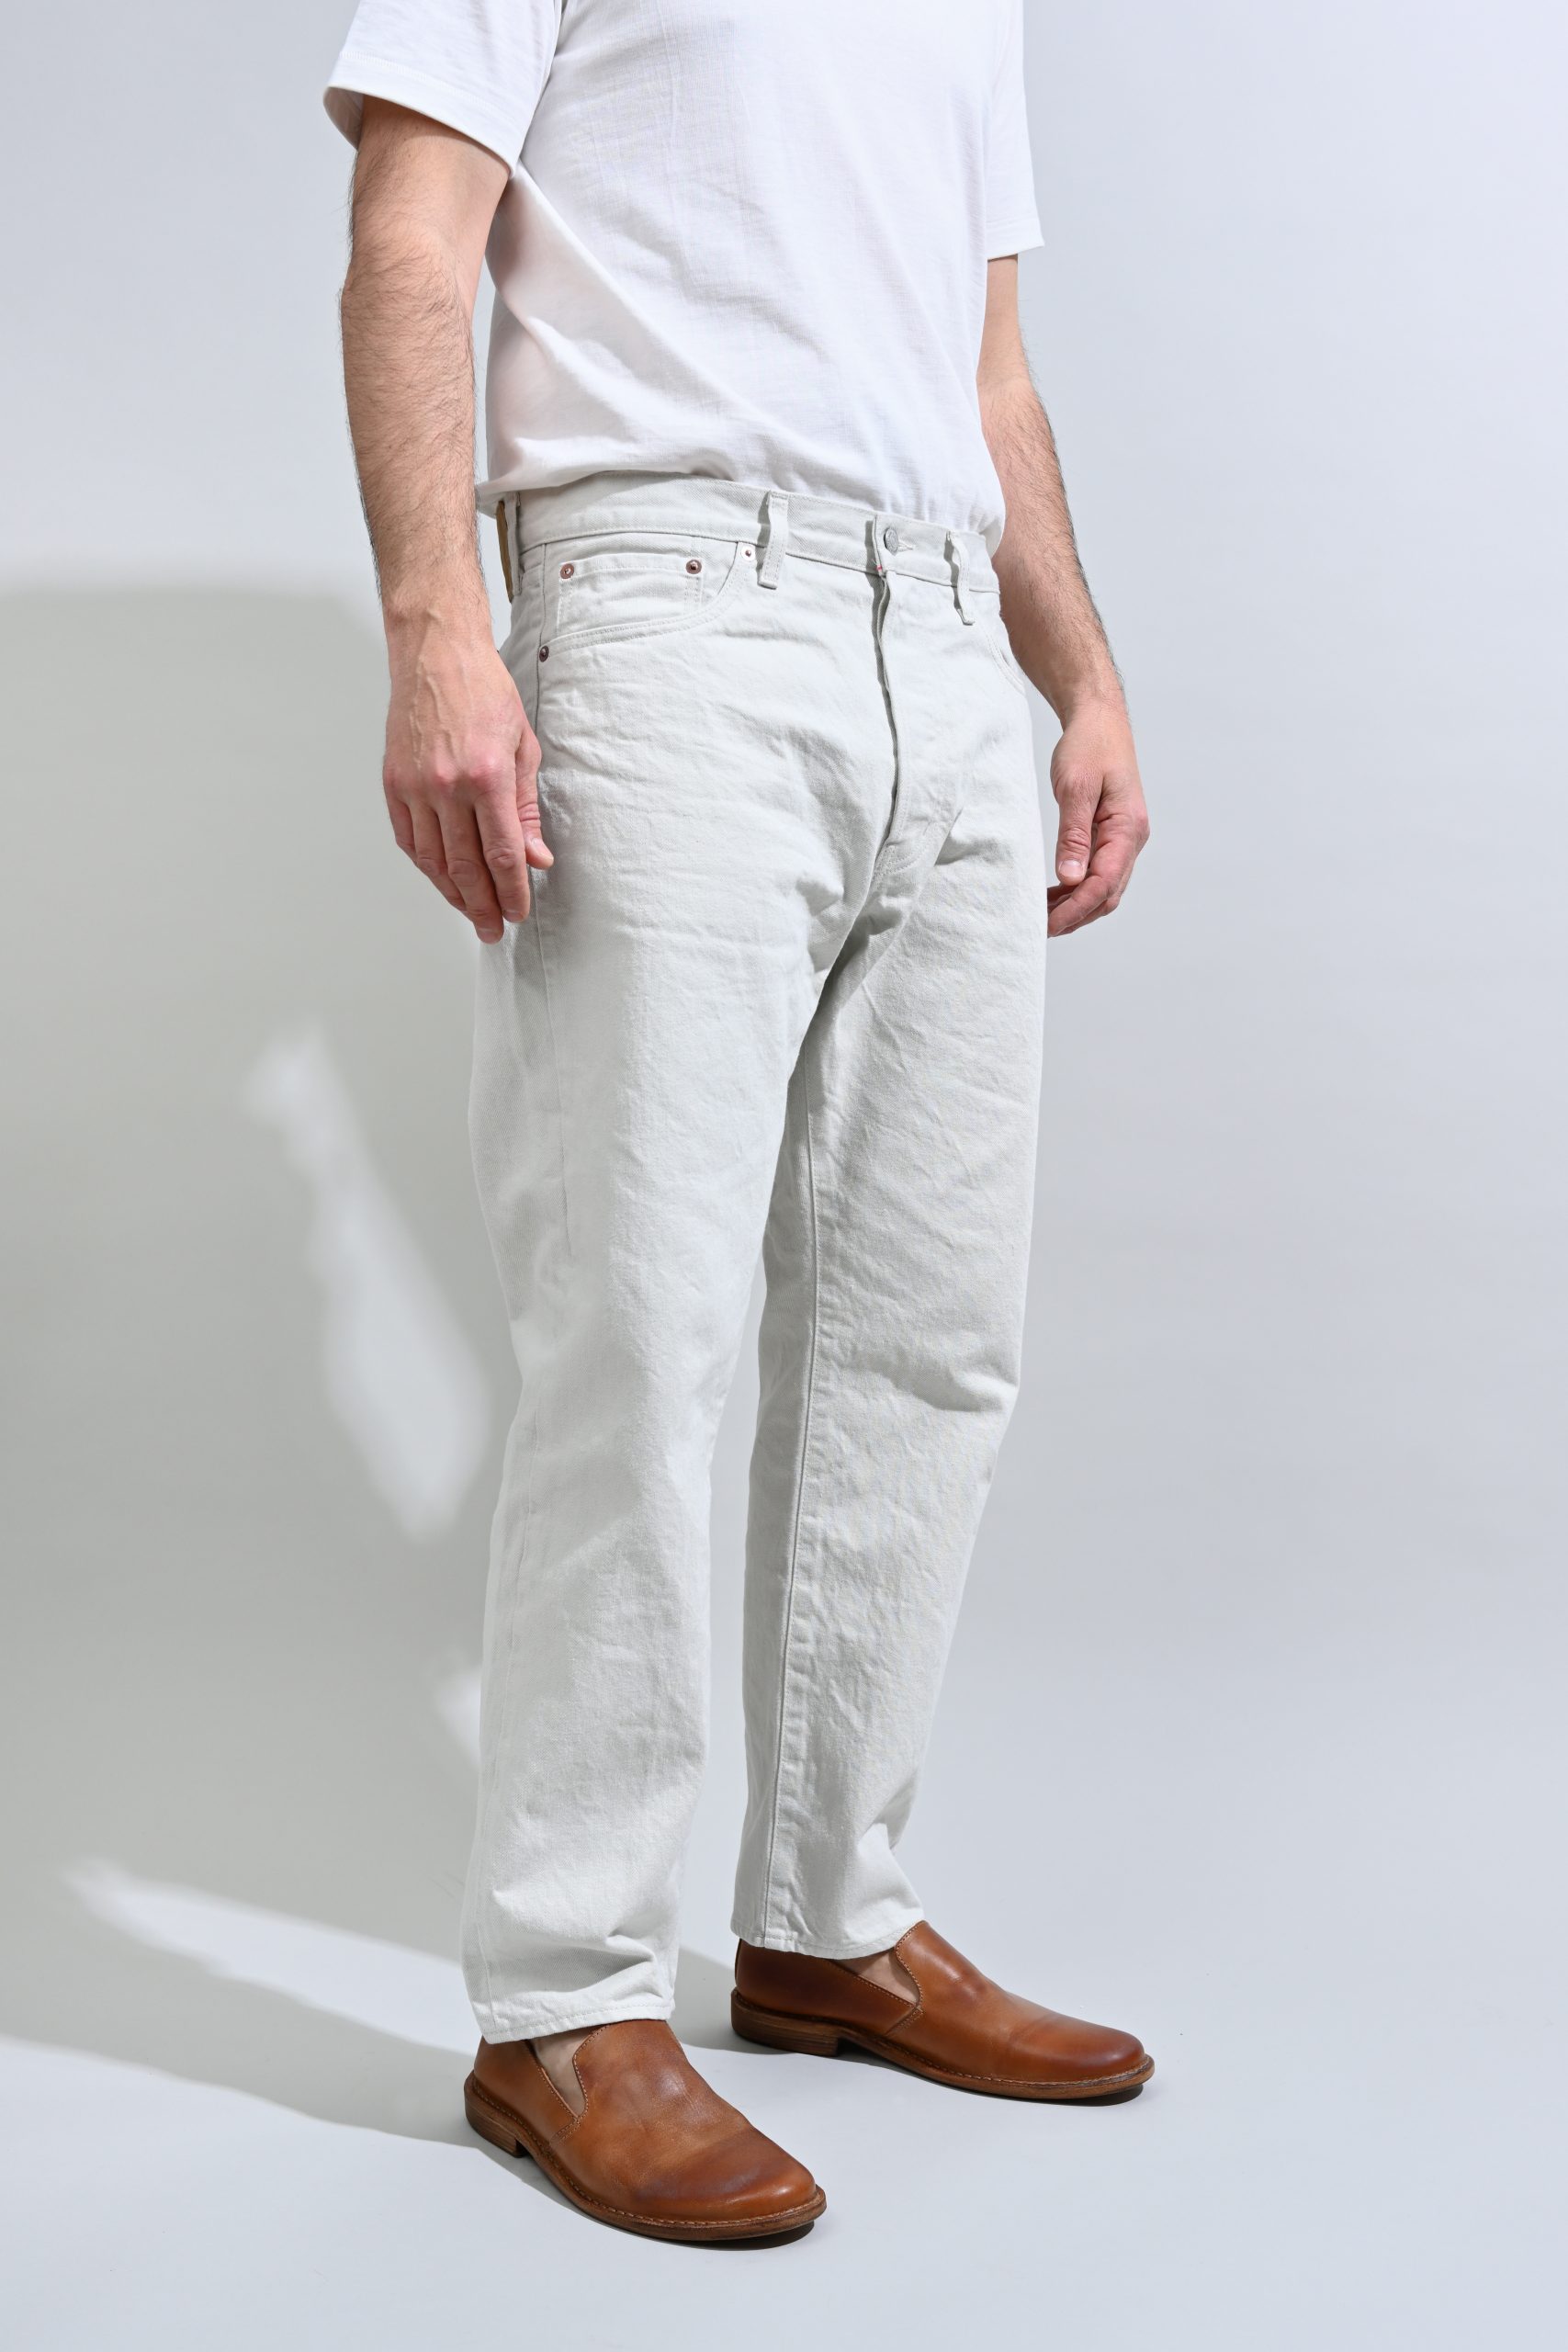 ORDINARY FIT Jean ANKLE Denim white